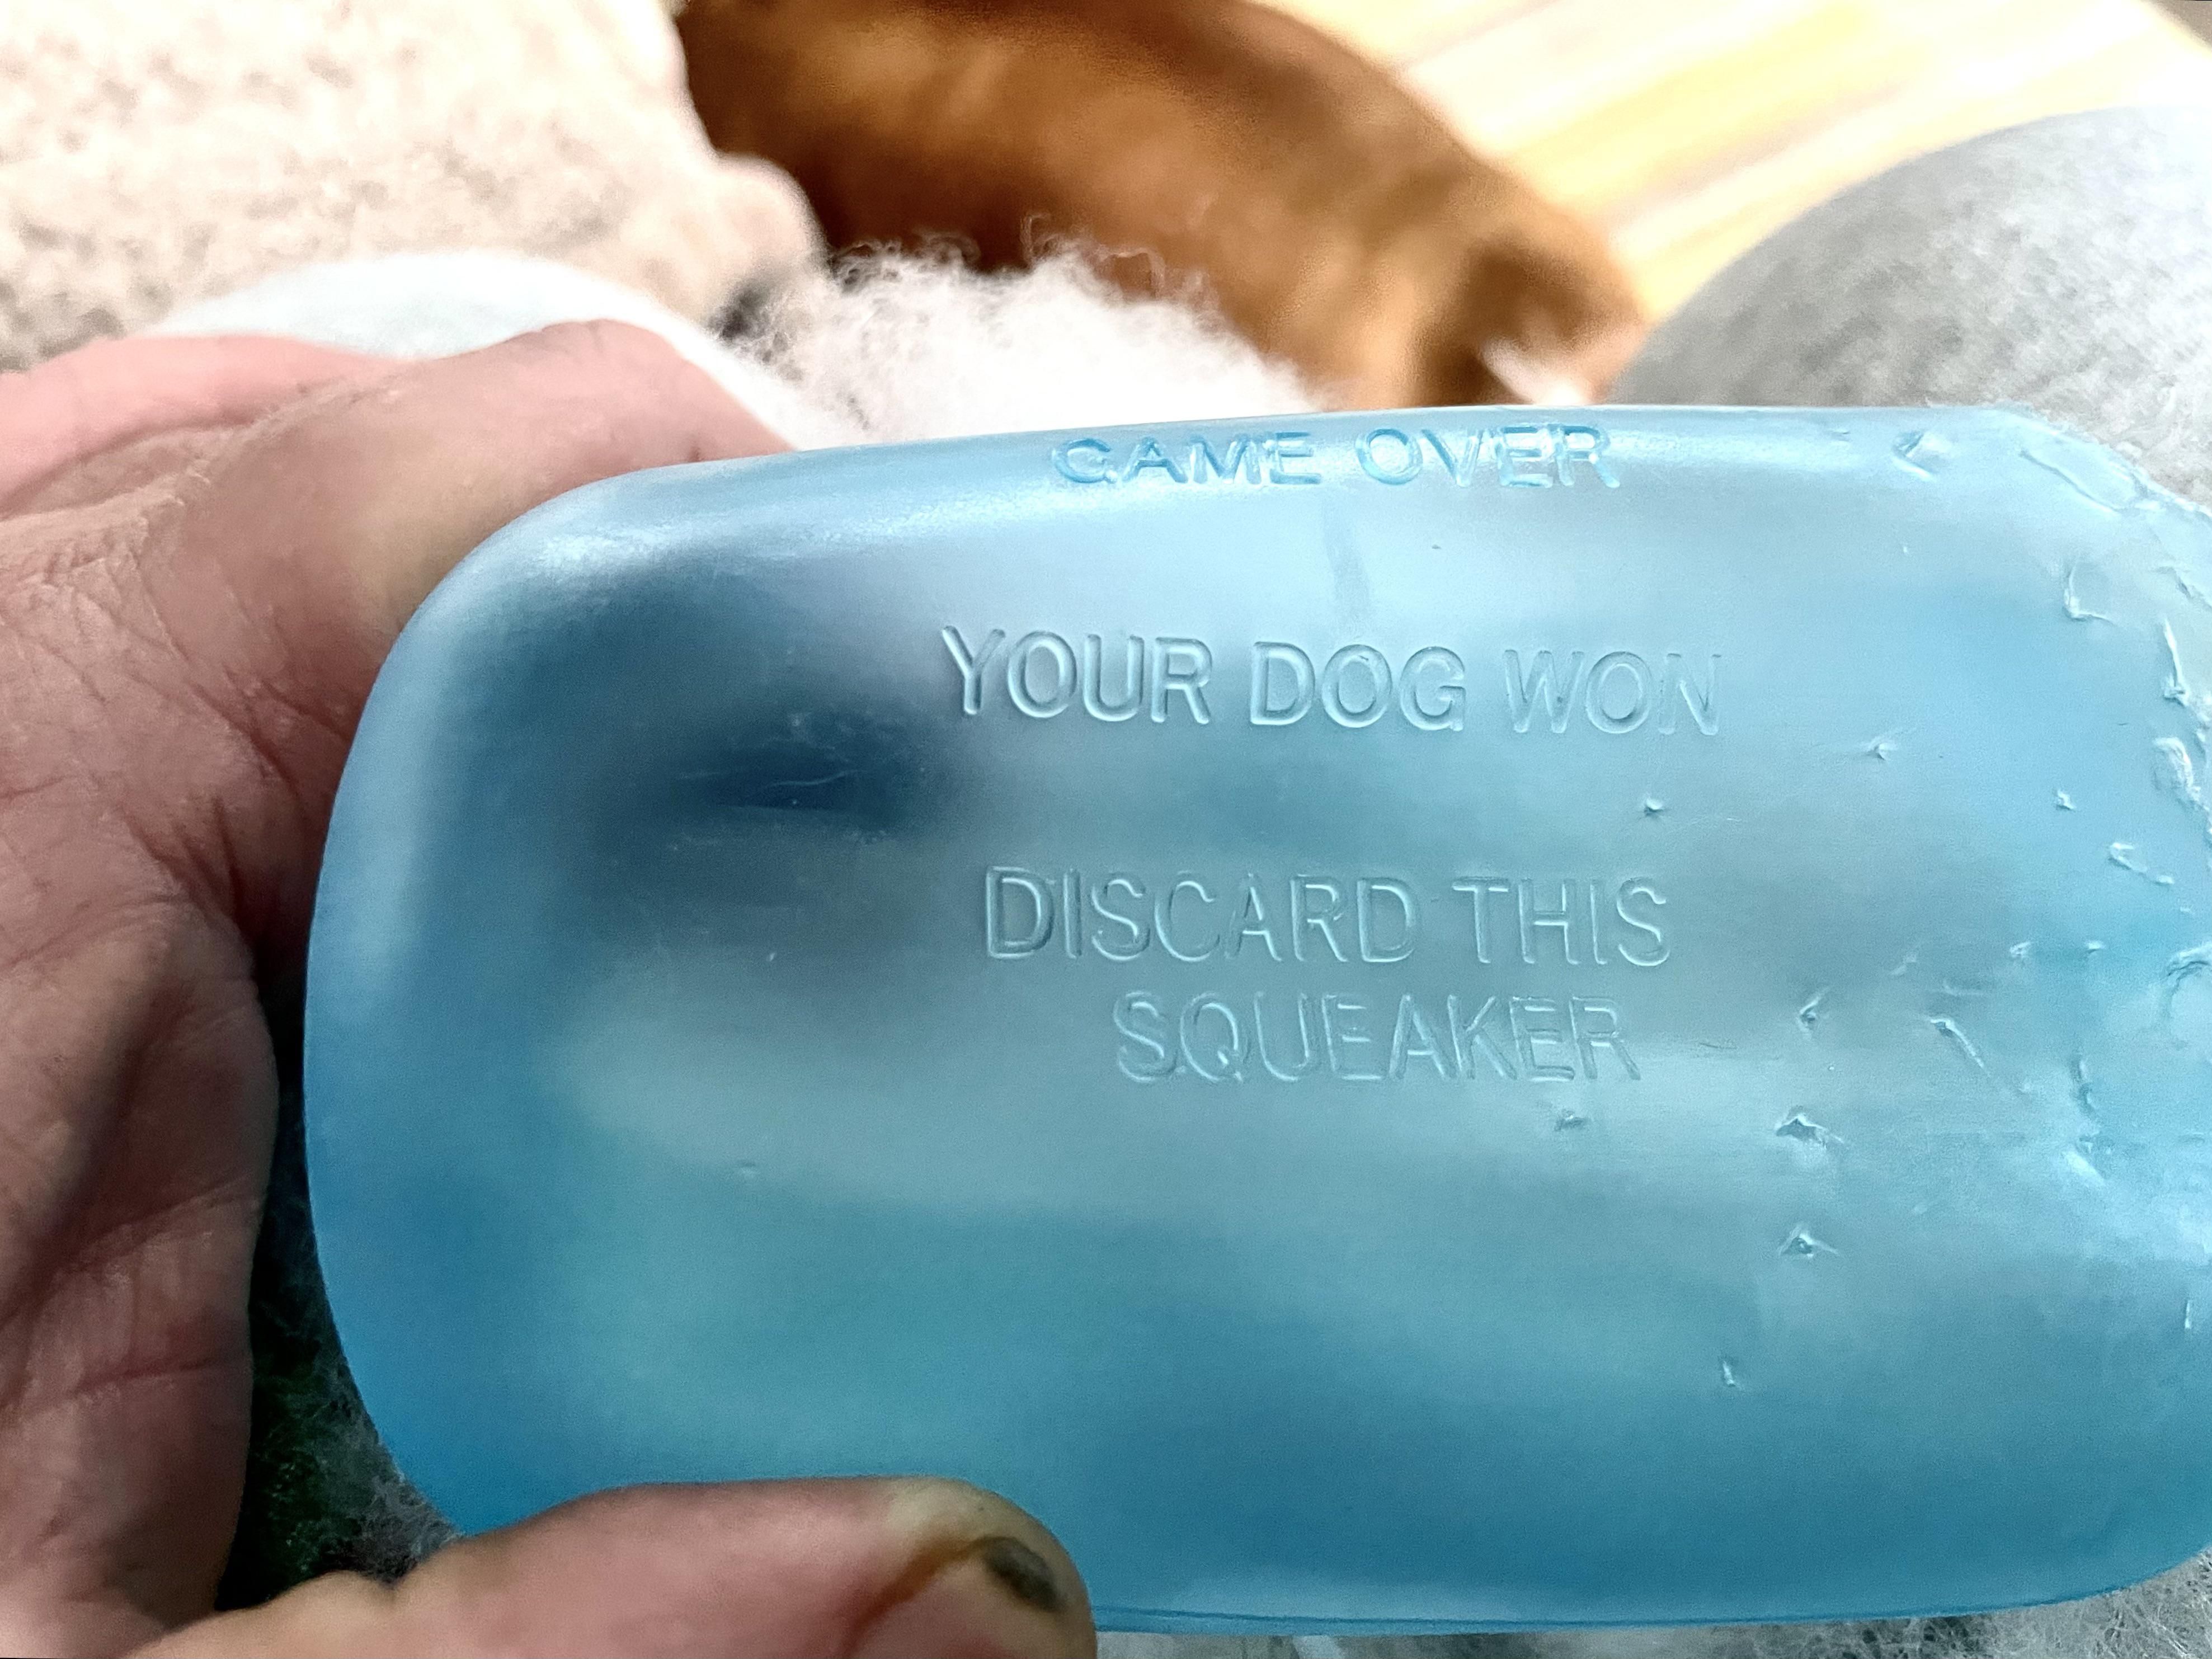 Found on the inside of a dog toy.